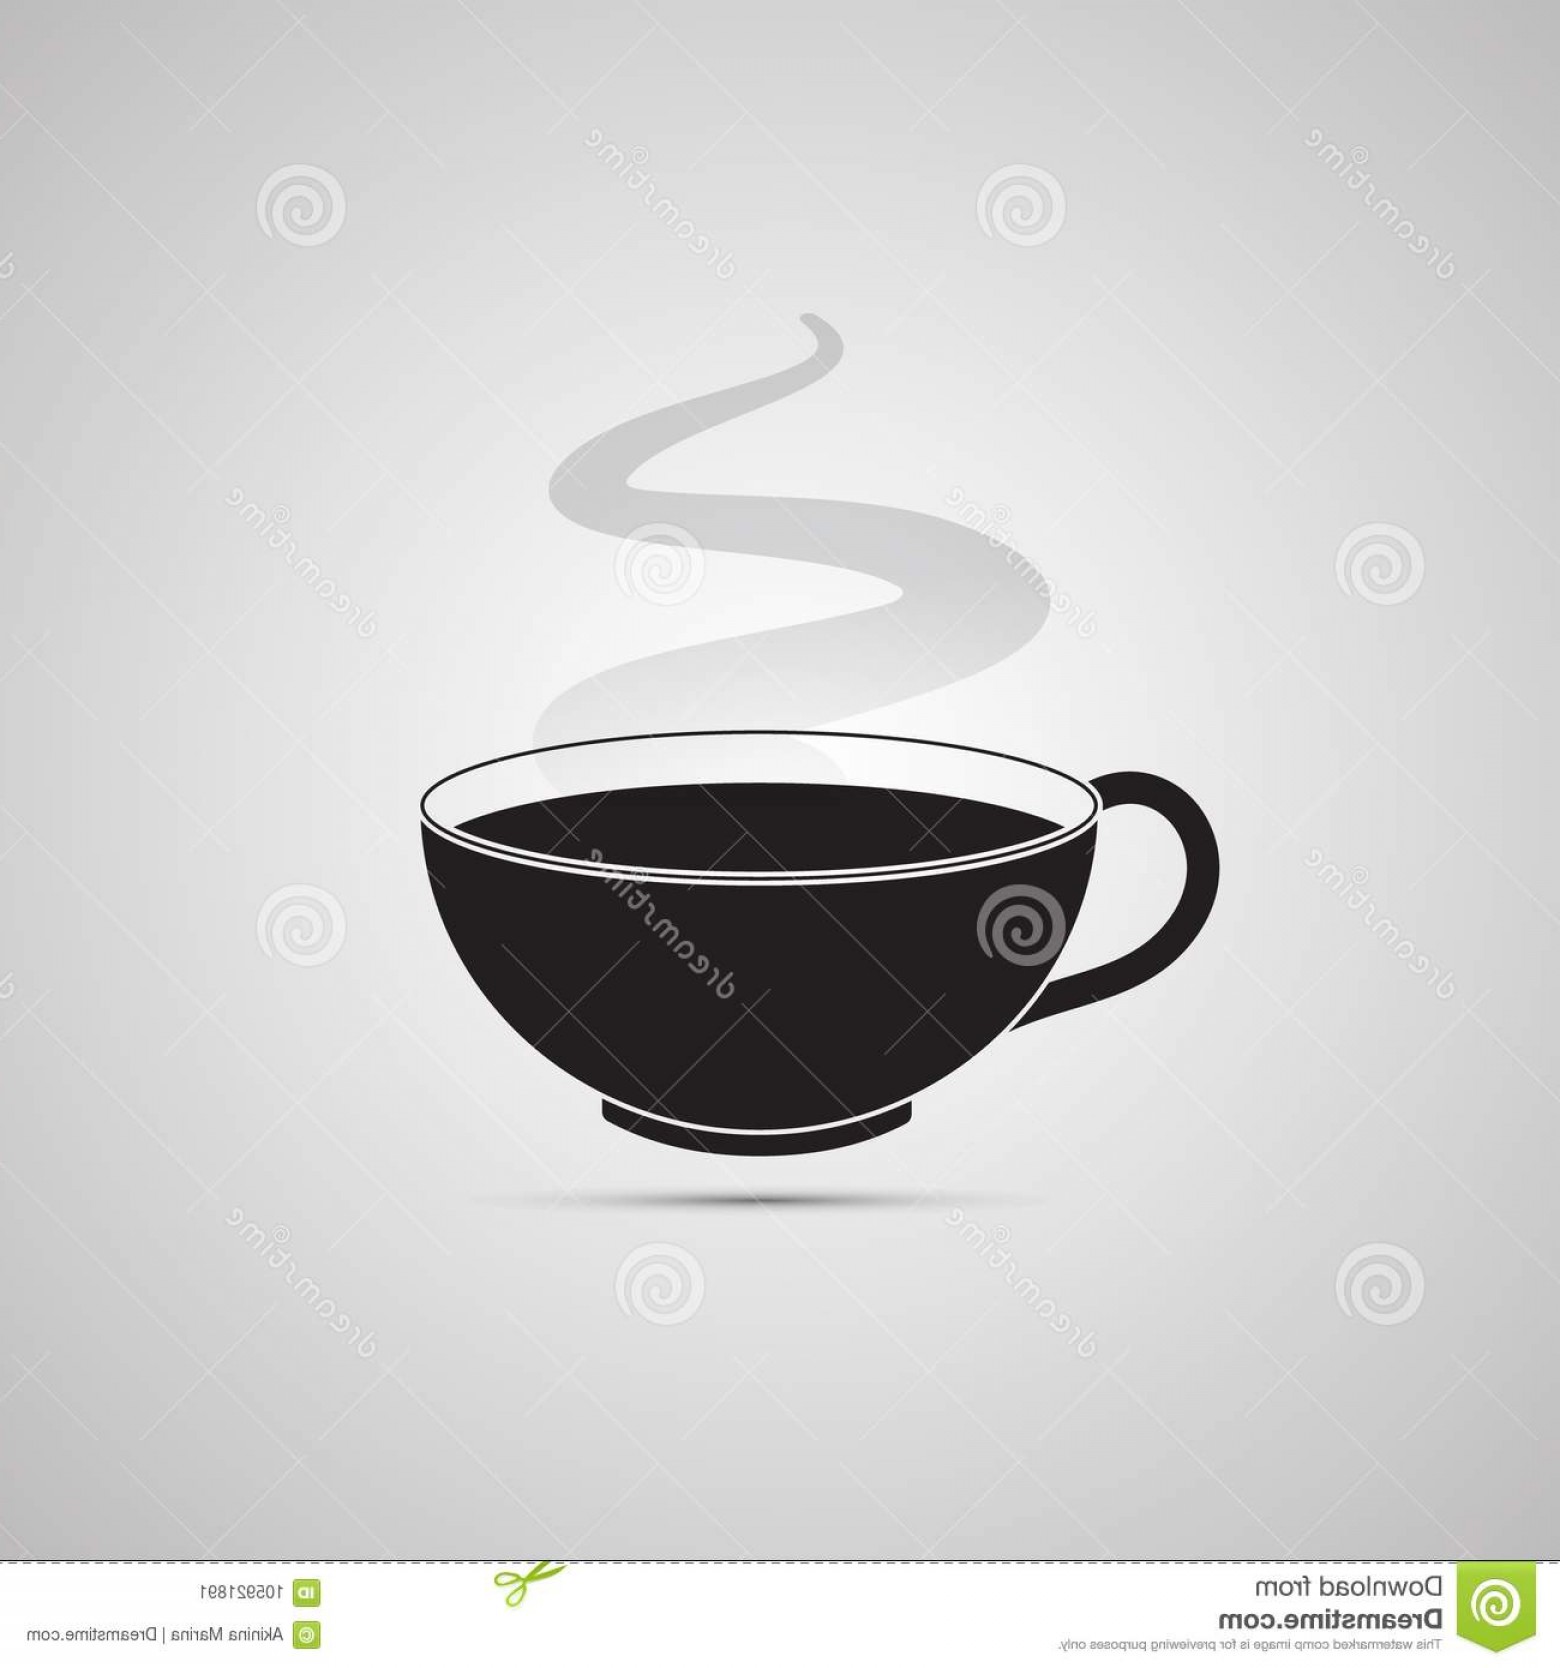 Hot Chocolate Vector At Vectorified Com Collection Of Hot Chocolate Vector Free For Personal Use